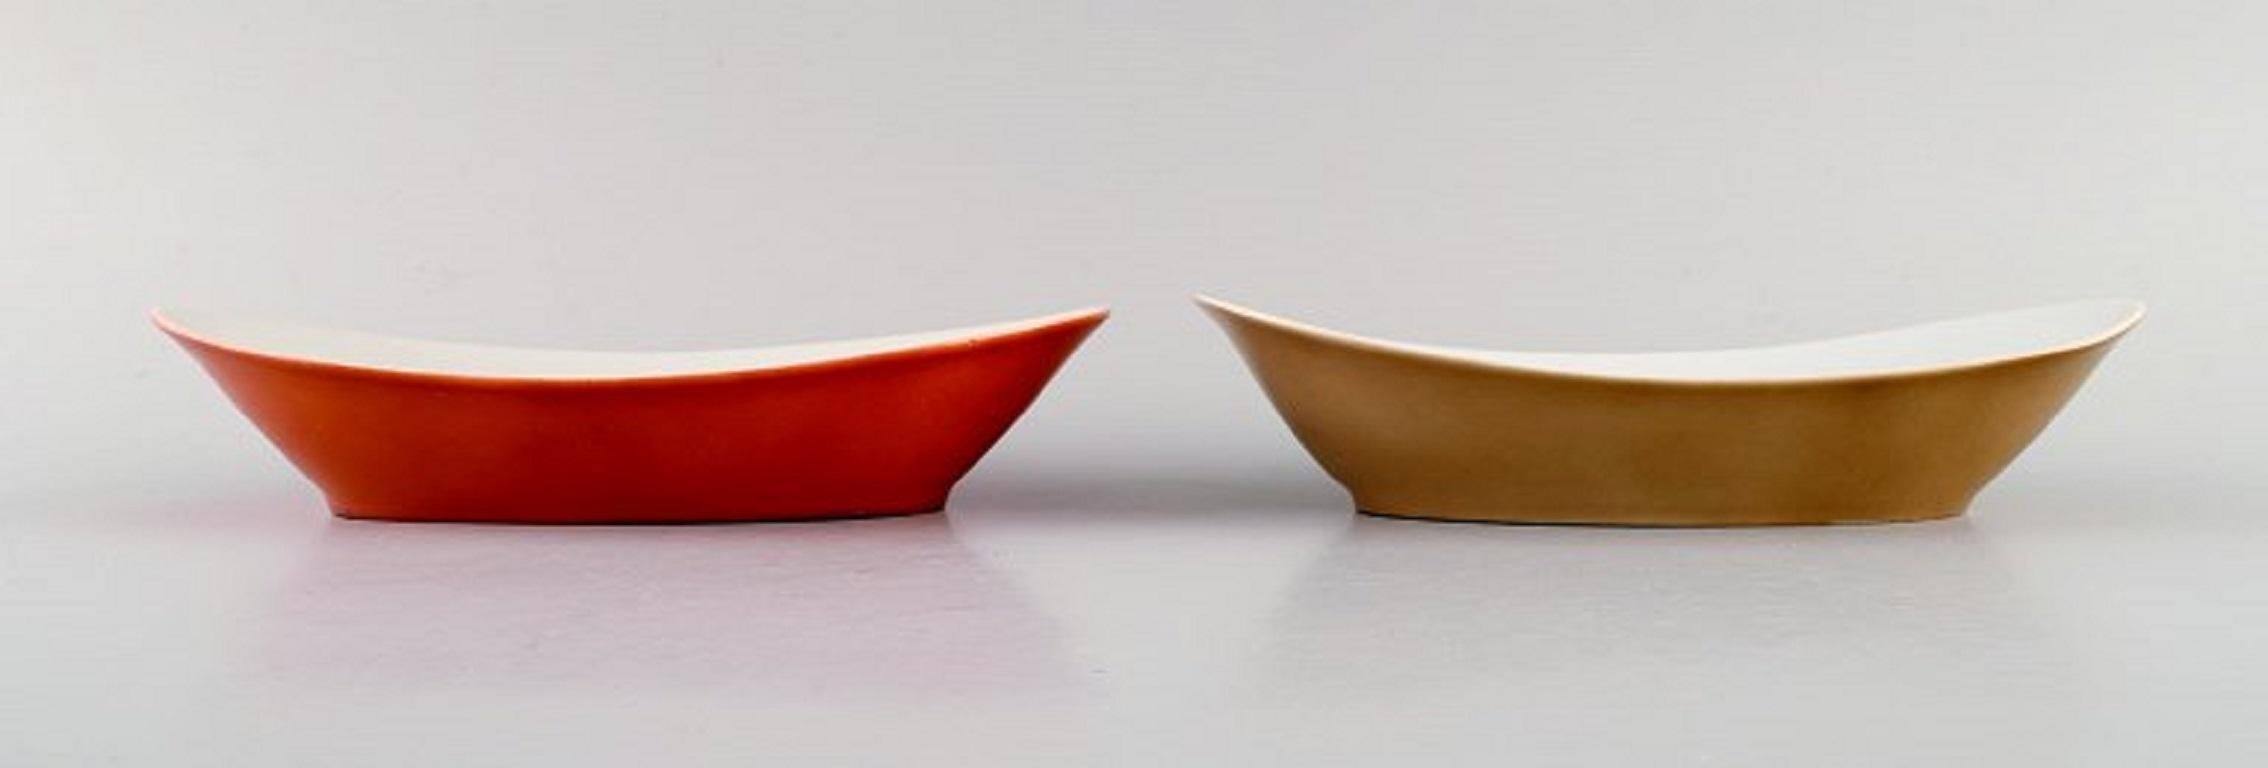 Kenji Fujita for Tackett Associates. Three bowls in porcelain. Dated 1953-56.
Largest measures: 21 x 5 cm.
In excellent condition.
Stamped.